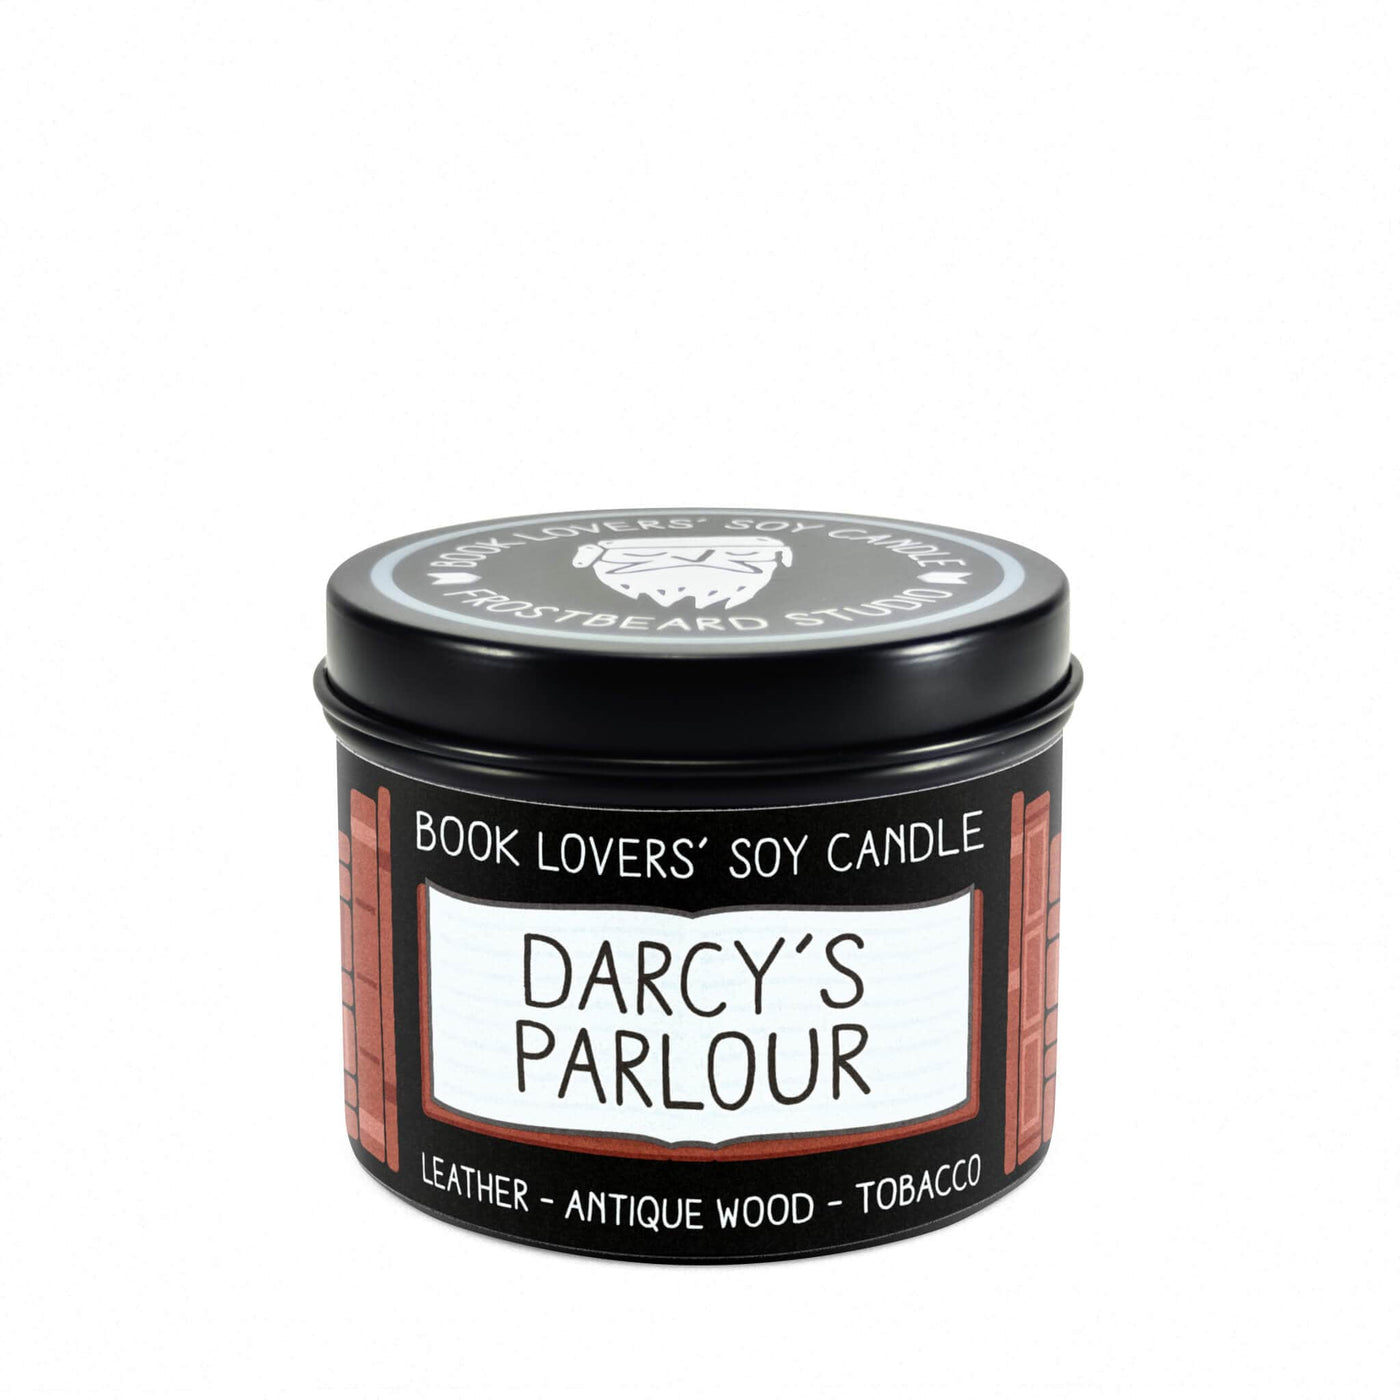 Darcy's Parlour - 4 oz Tin - Book Lovers' Soy Candle - Frostbeard Studio